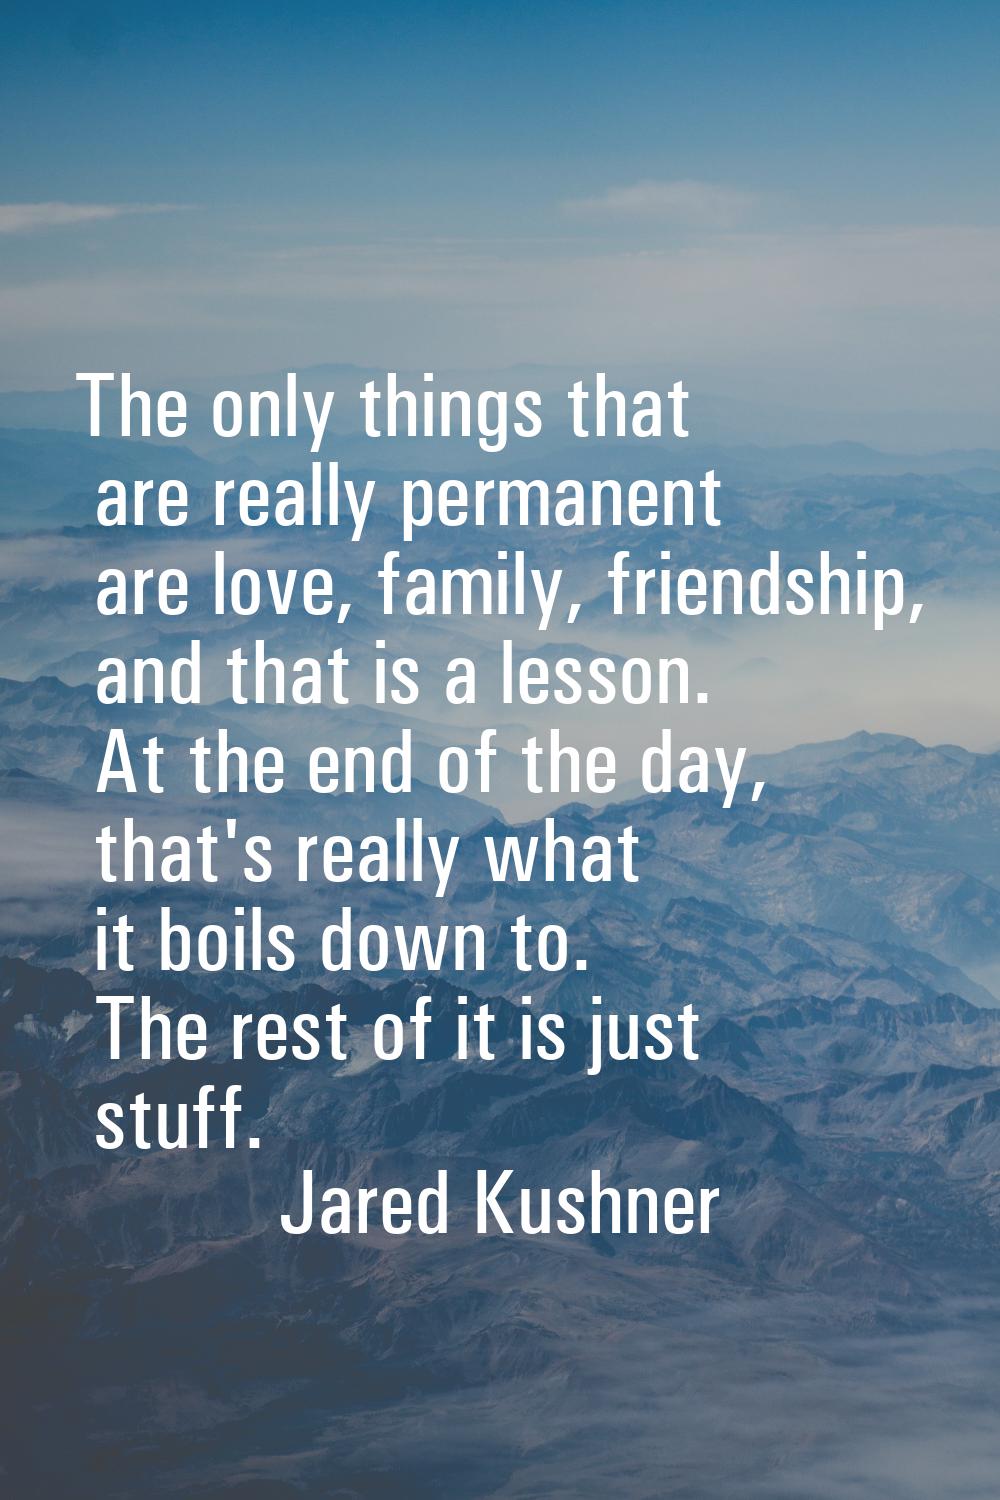 The only things that are really permanent are love, family, friendship, and that is a lesson. At th